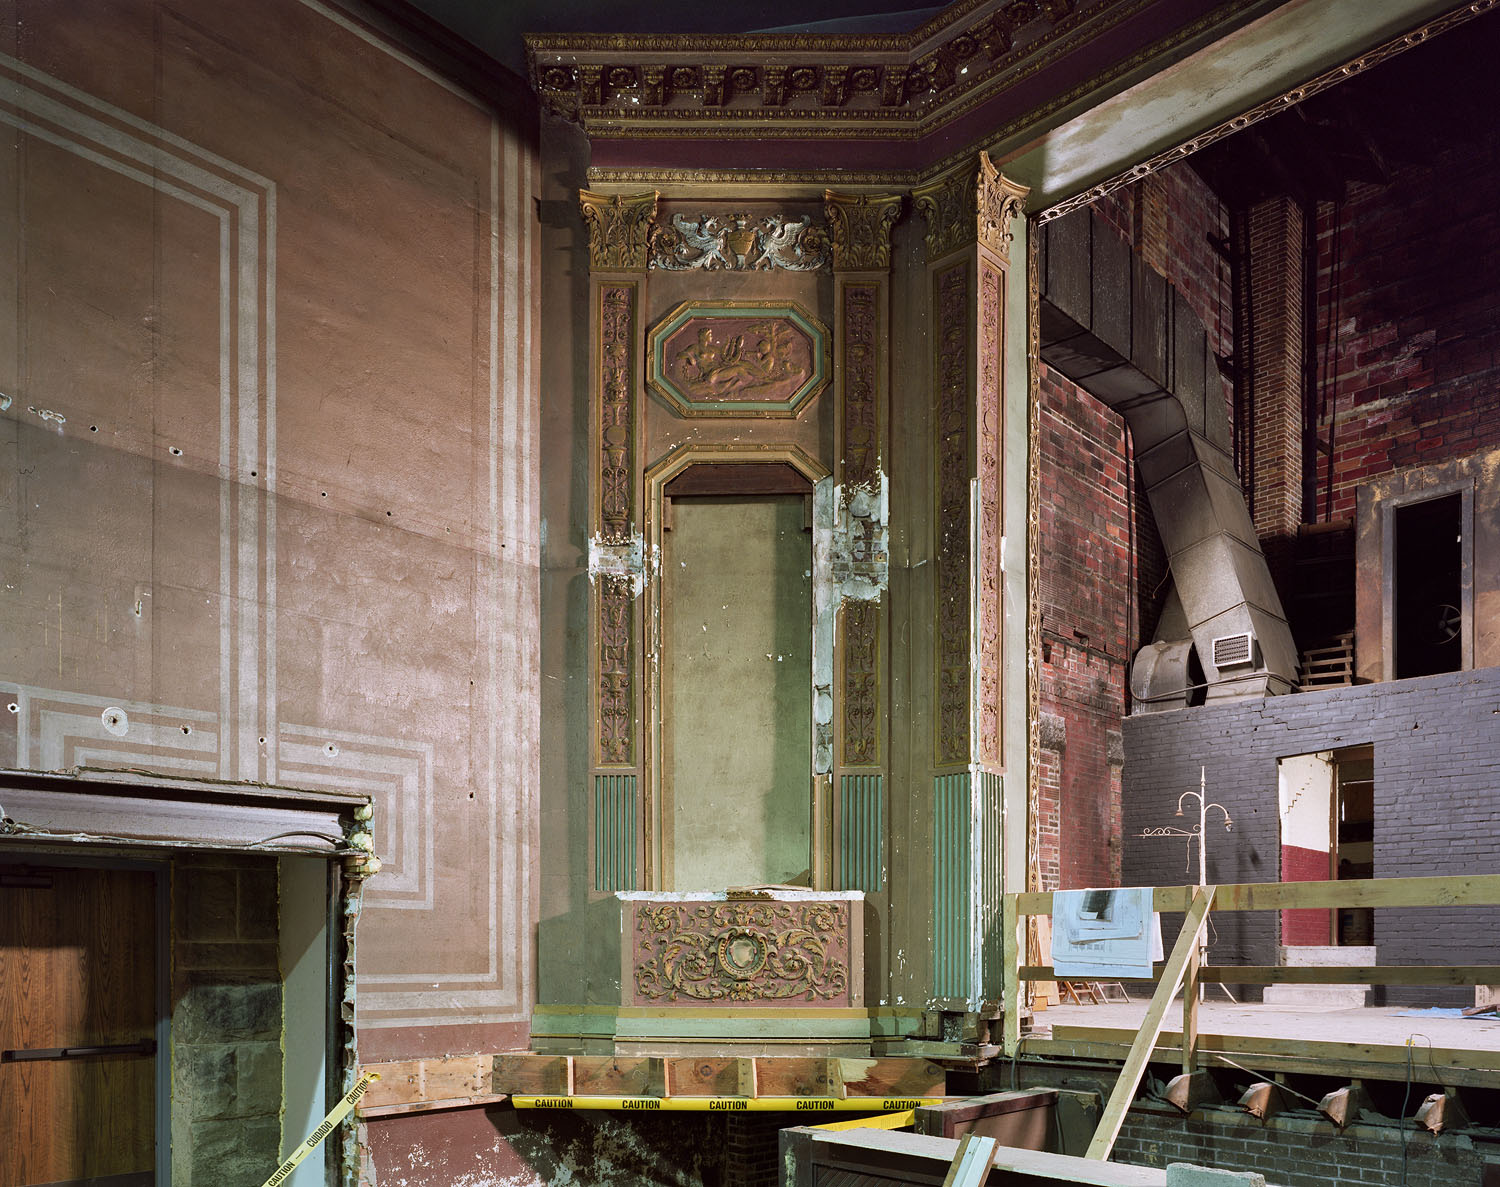 A view of the 1927 plasterwork remaining intact in the Lyric Theatre